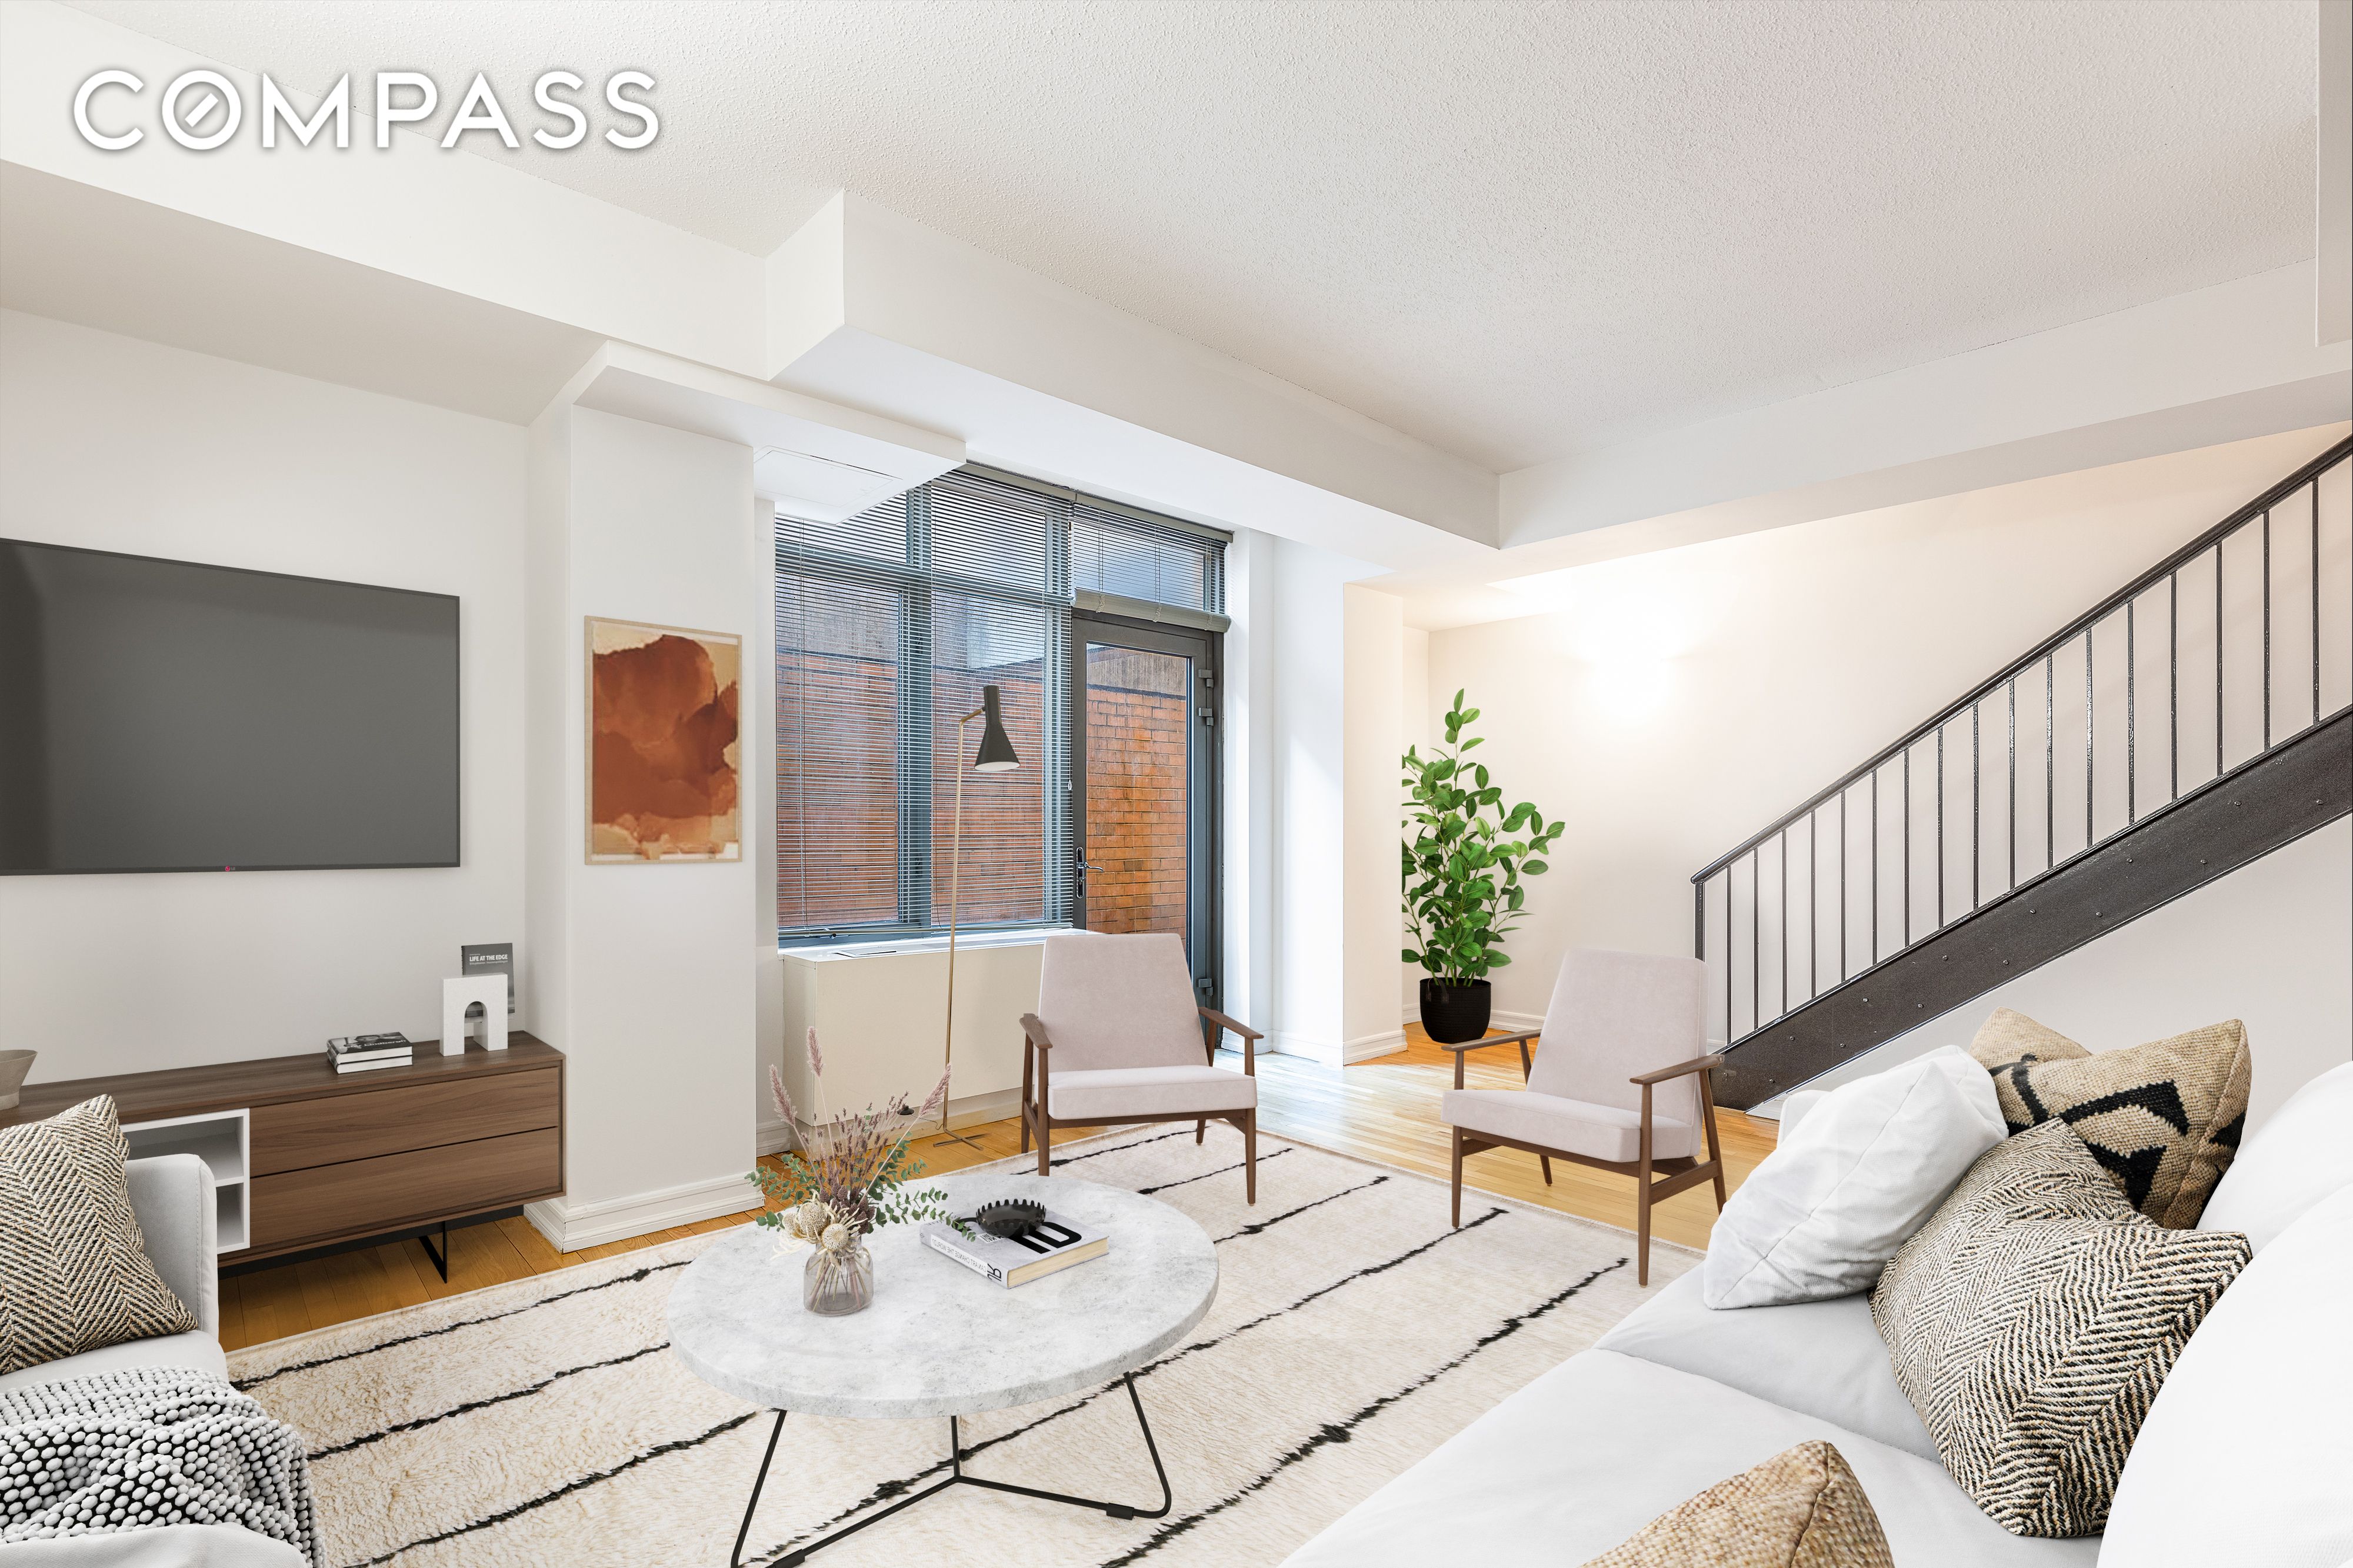 321 West 54th Street 106, Hell S Kitchen, Midtown West, NYC - 3 Bedrooms  
1.5 Bathrooms  
6 Rooms - 